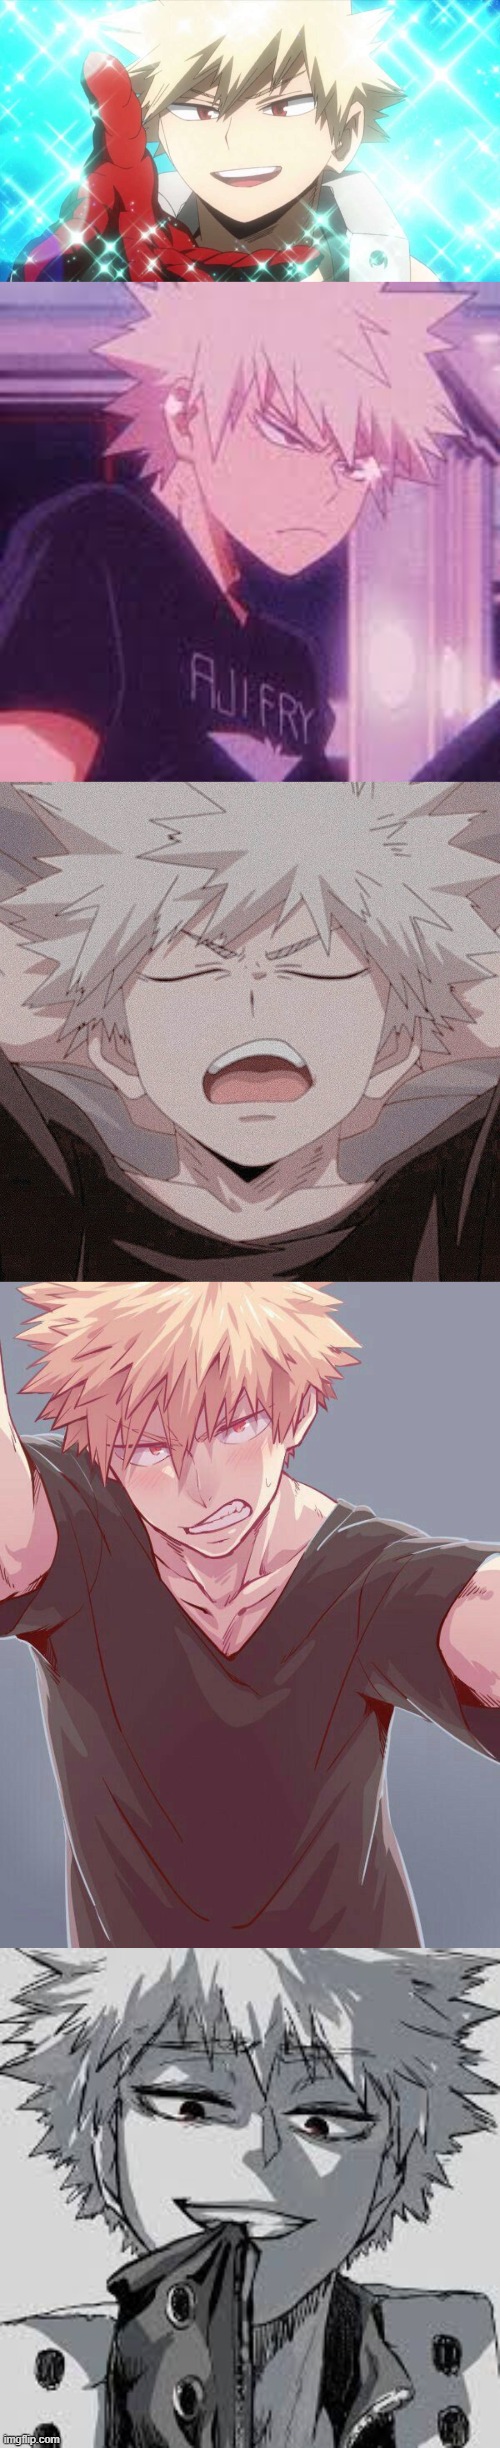 image tagged in bakugo | made w/ Imgflip meme maker